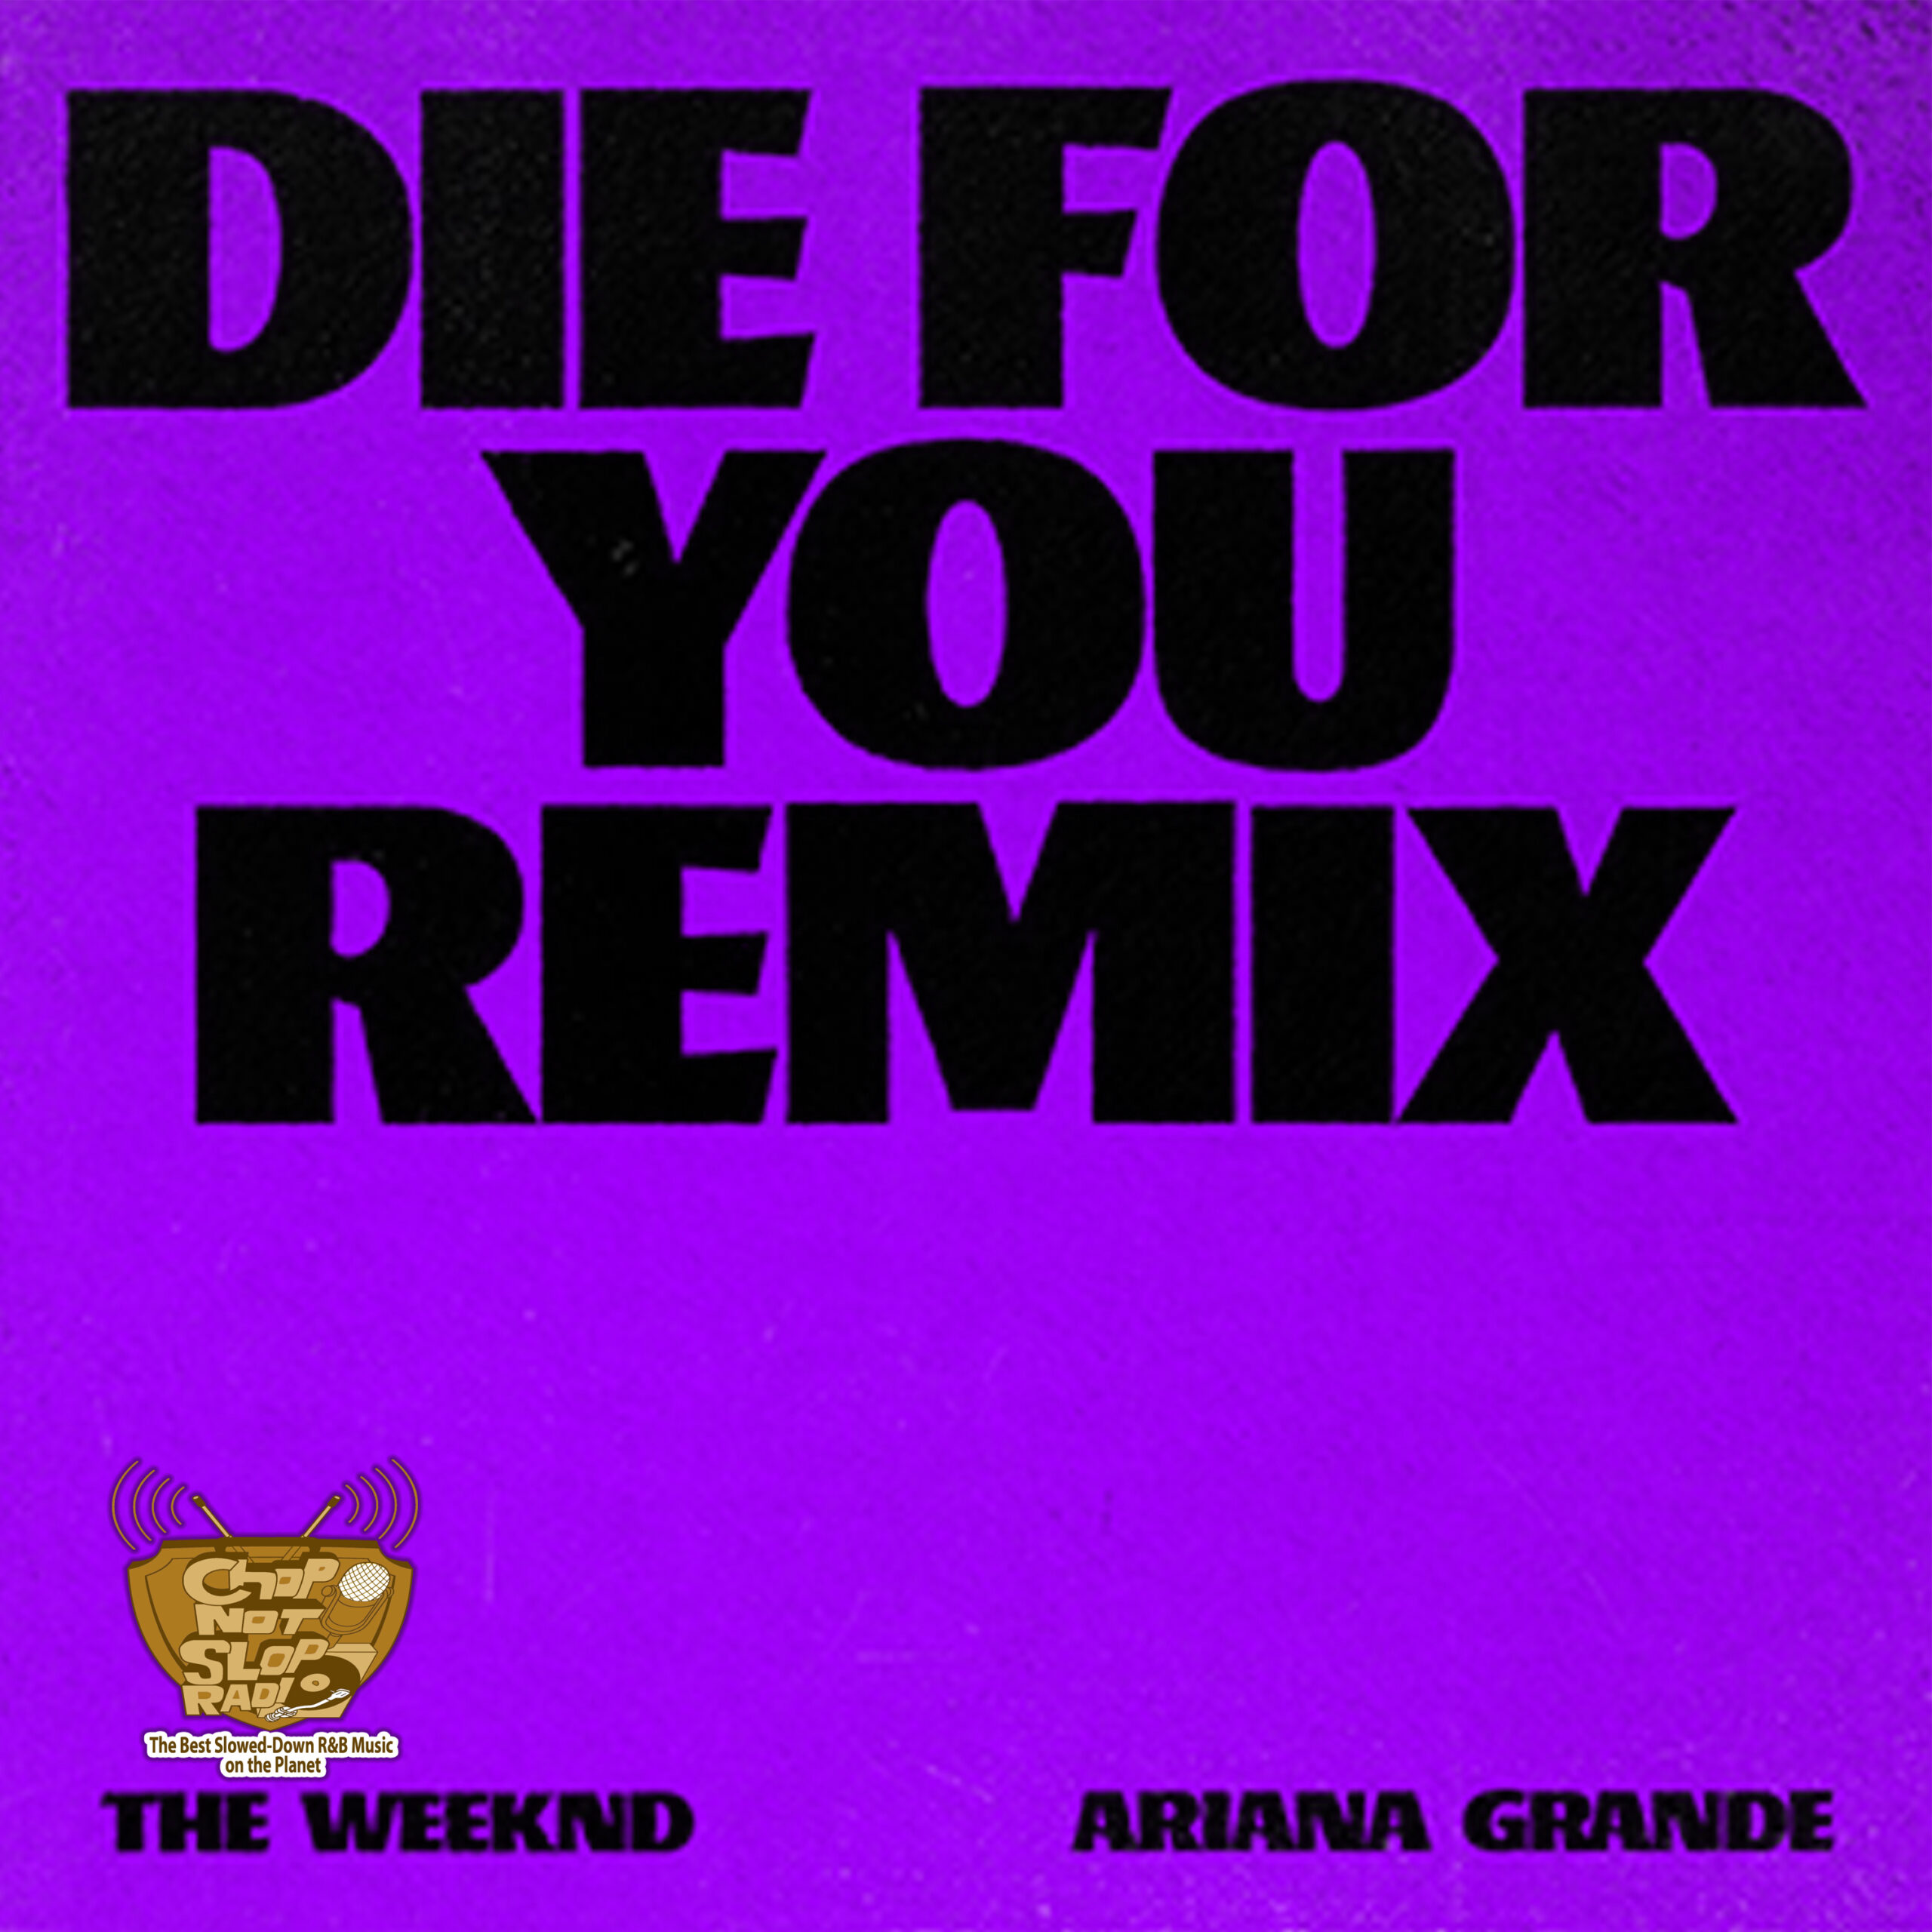 The Weeknd – Die For You Ft. Ariana Grande (ChopNotSlop)